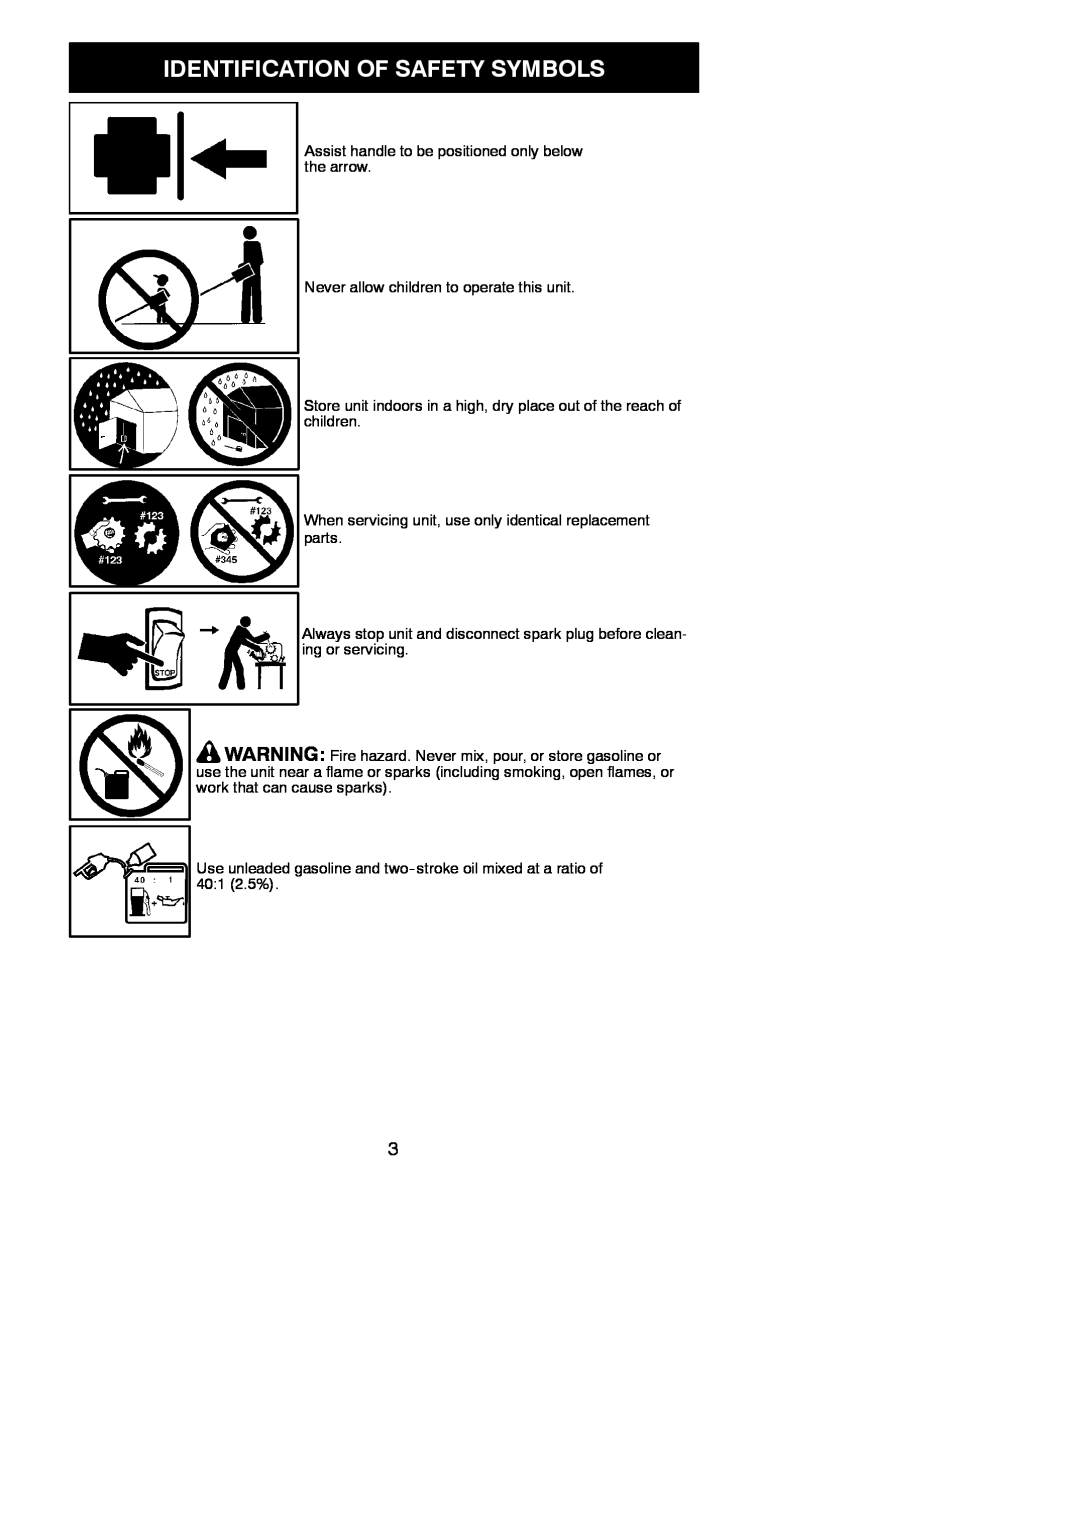 Poulan 115248826, 952711944 Identification Of Safety Symbols, Assist handle to be positioned only below the arrow 